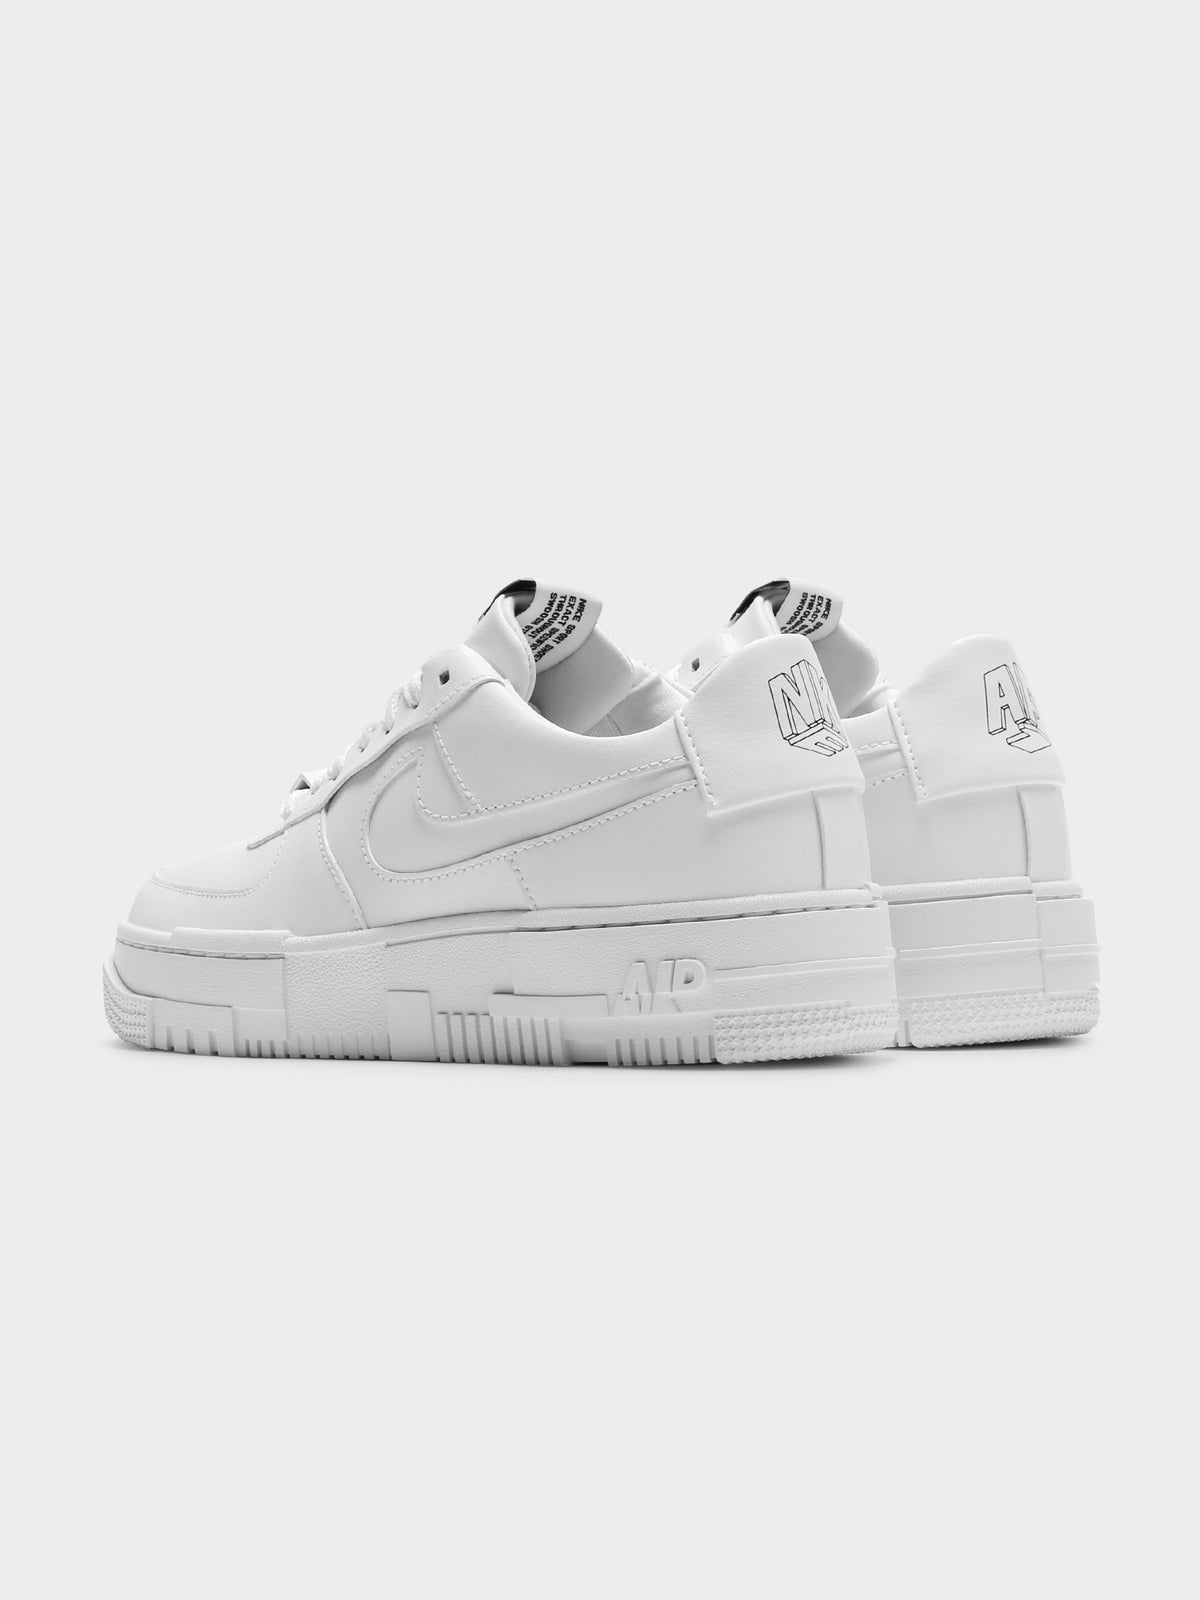 Womens Air Force 1 Pixel Sneakers in White